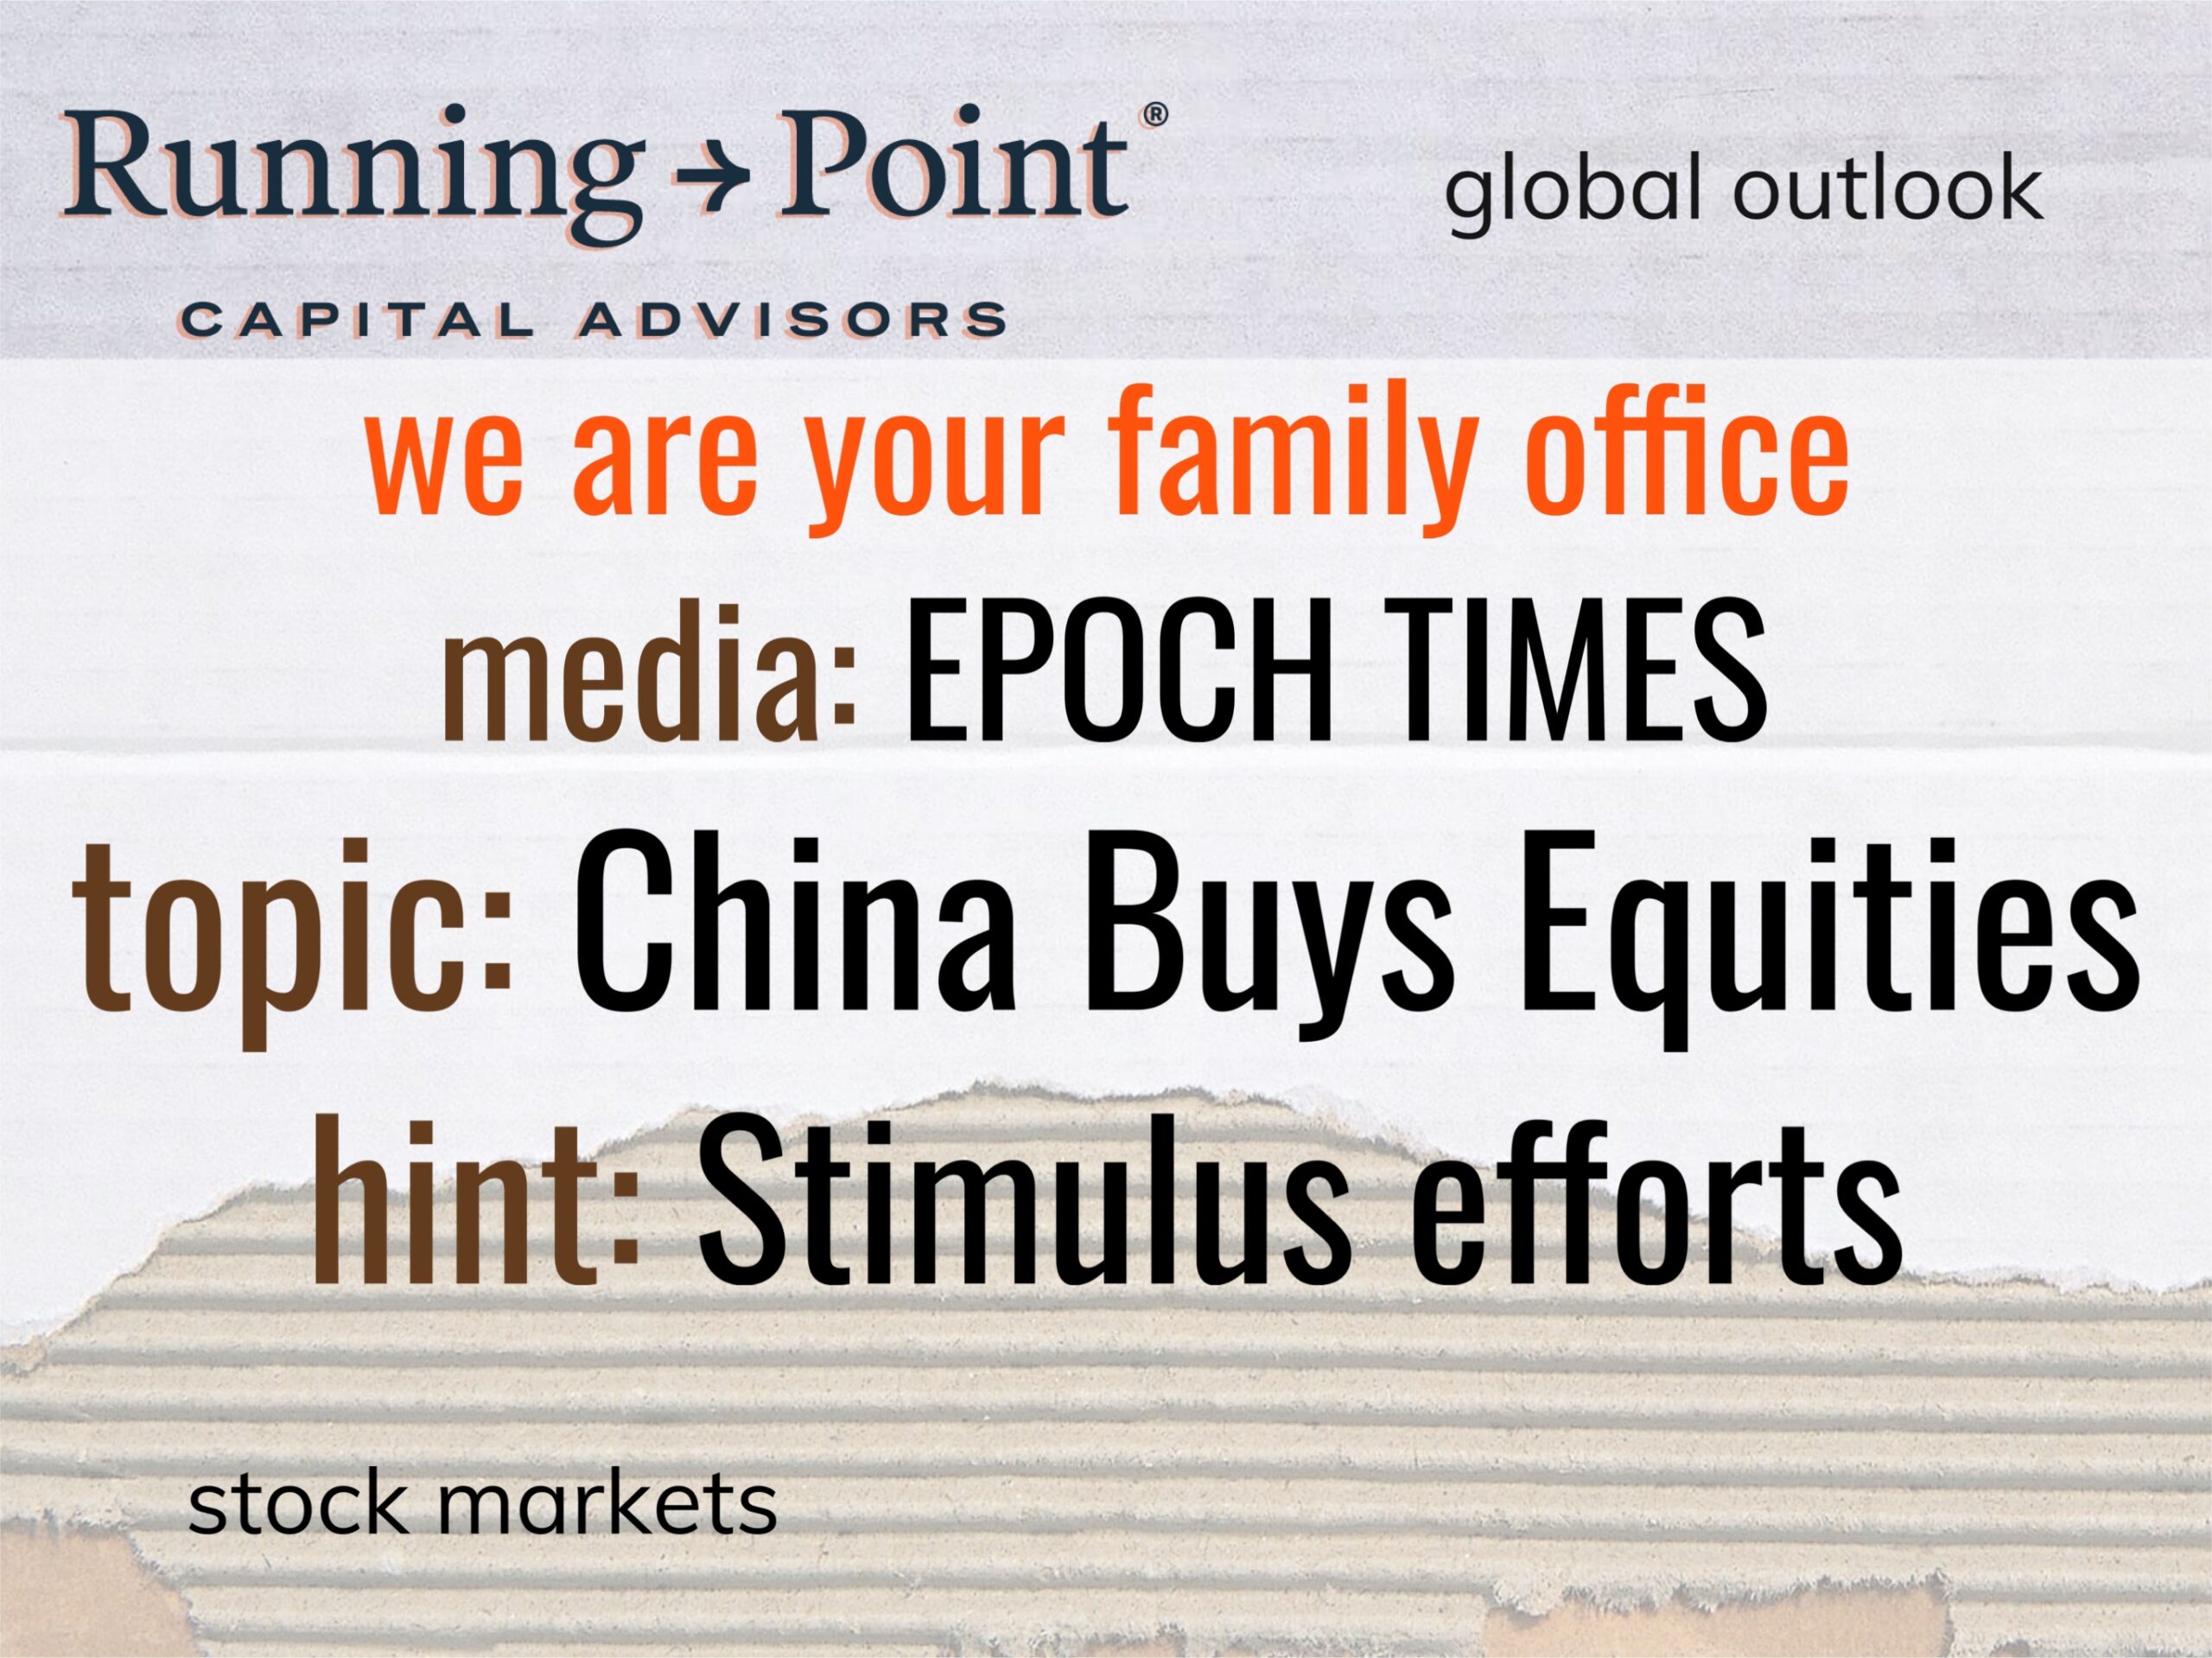 Epoch Times: China Buys Equities